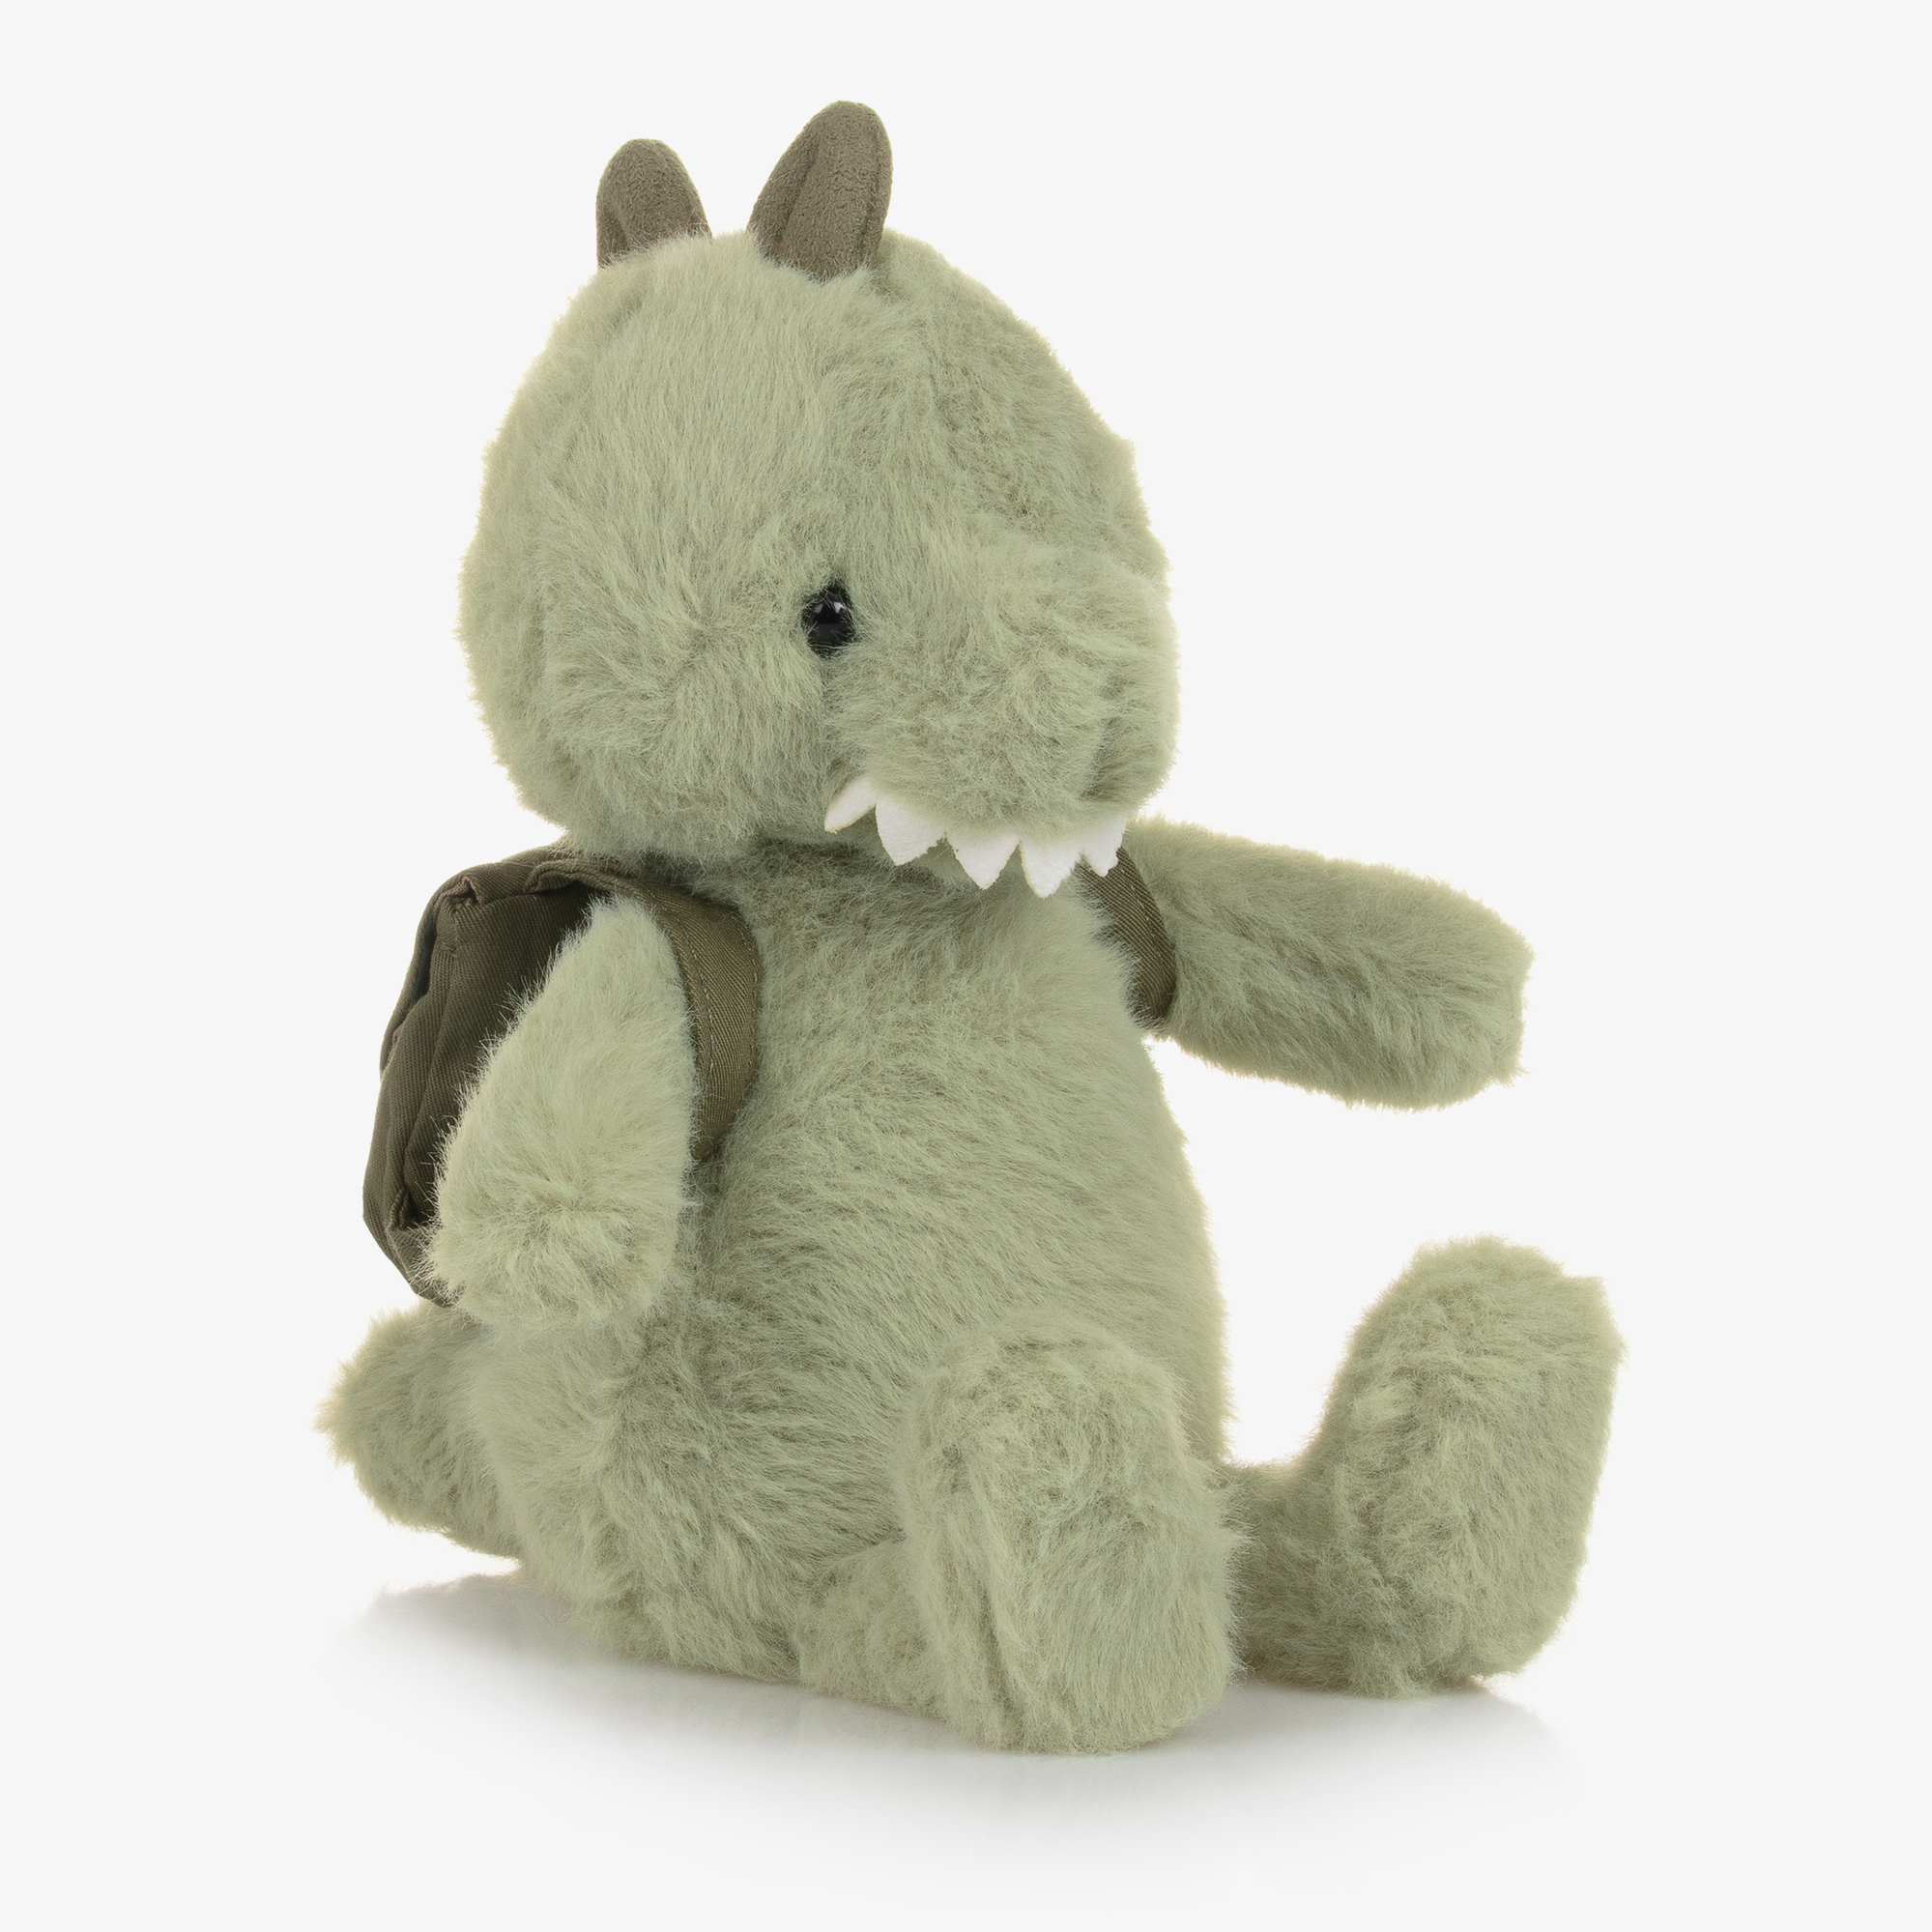 Jellycat - Green Backpack Dino Soft Toy (24cm)